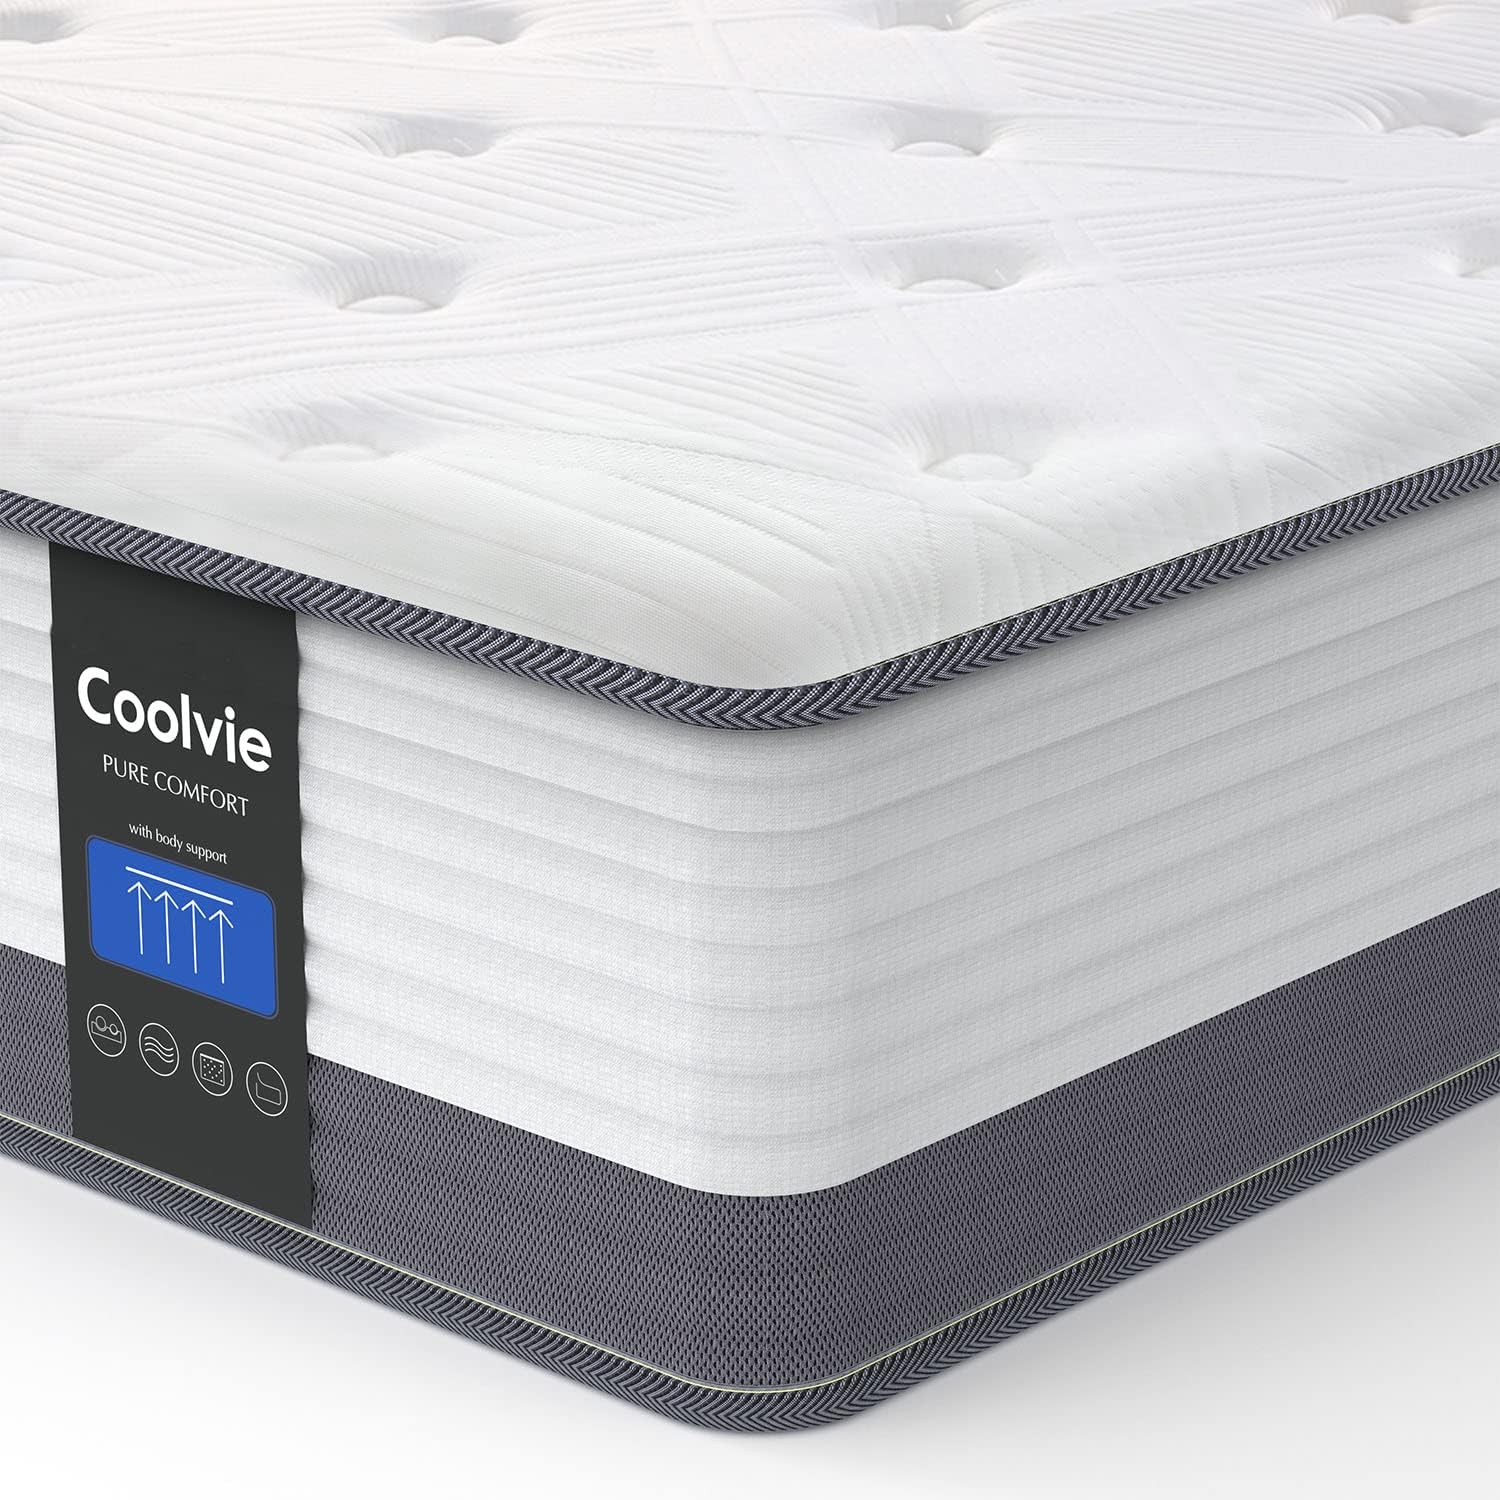 Read more about the article Coolvie 10 Inch Queen Mattresses, Queen Size Hybrid Mattress Built in Pocketed Coils and Gel Memory Foam Layer for ONLY $242.51 (Was $319.99)